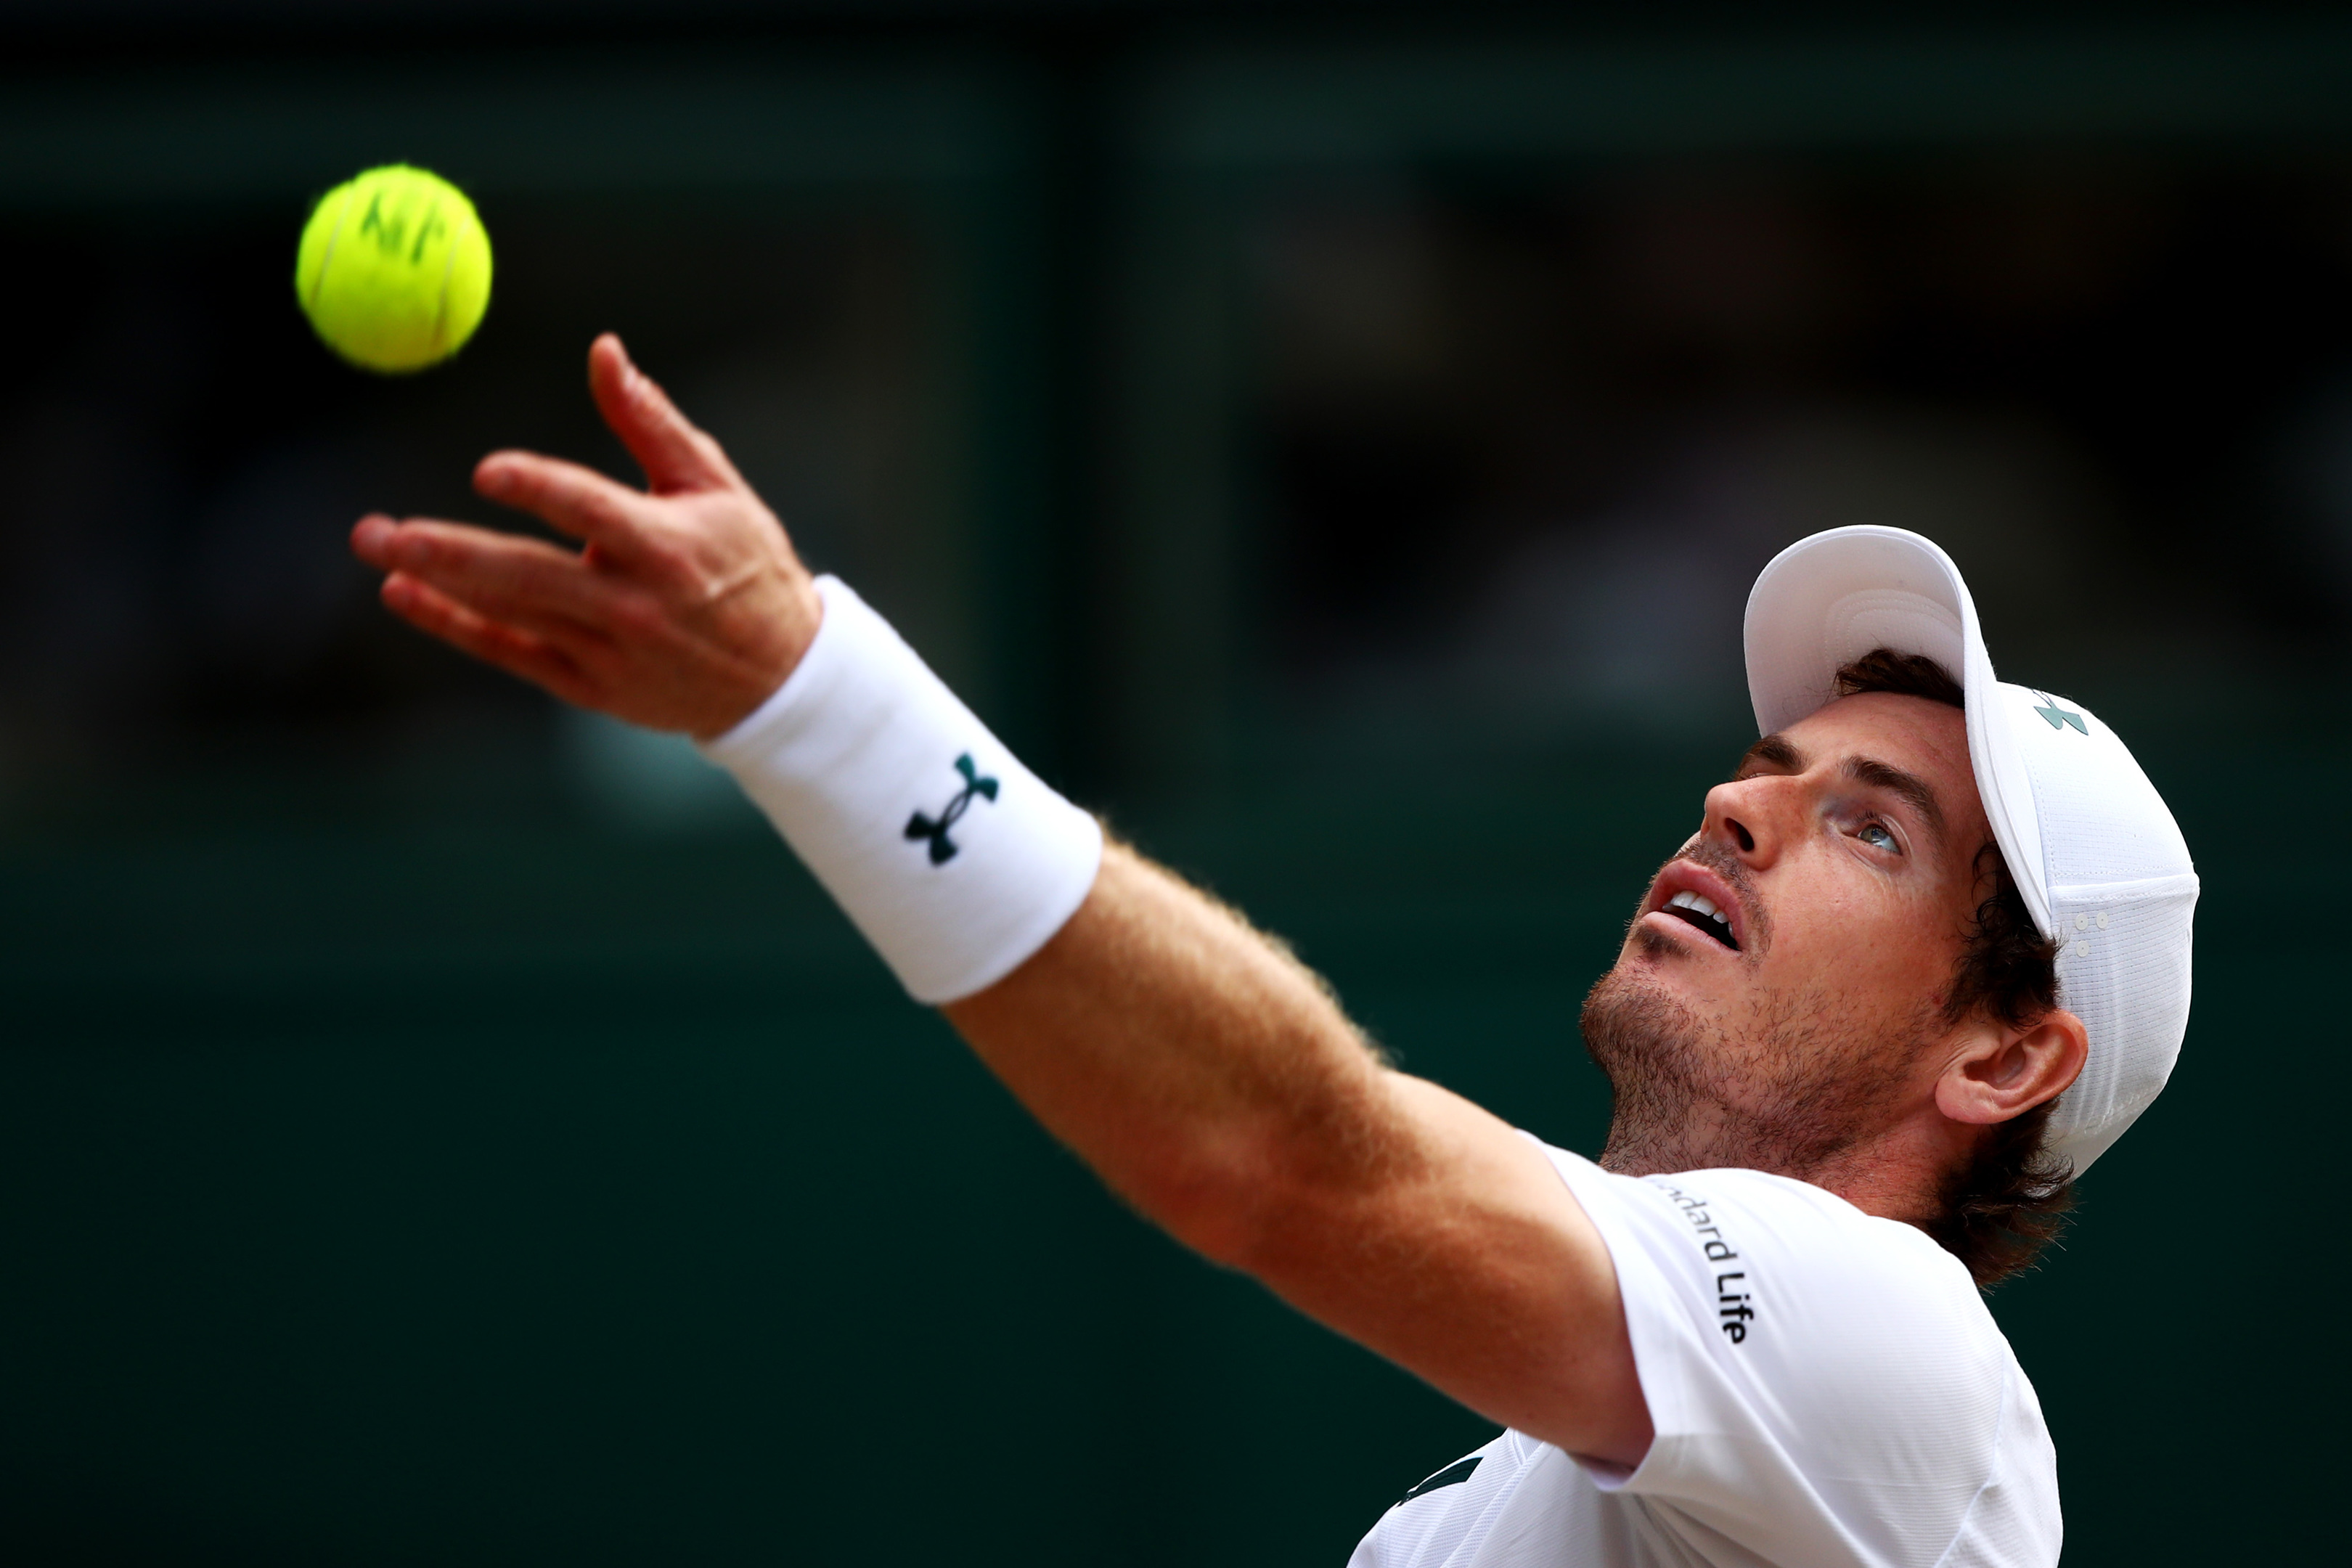 Andy Murray of Great Britain serves during the Gentlemen's Singles quarter final match against Sam Querrey of The United States on day nine of Wimbledon   (Clive Brunskill/Getty Images)